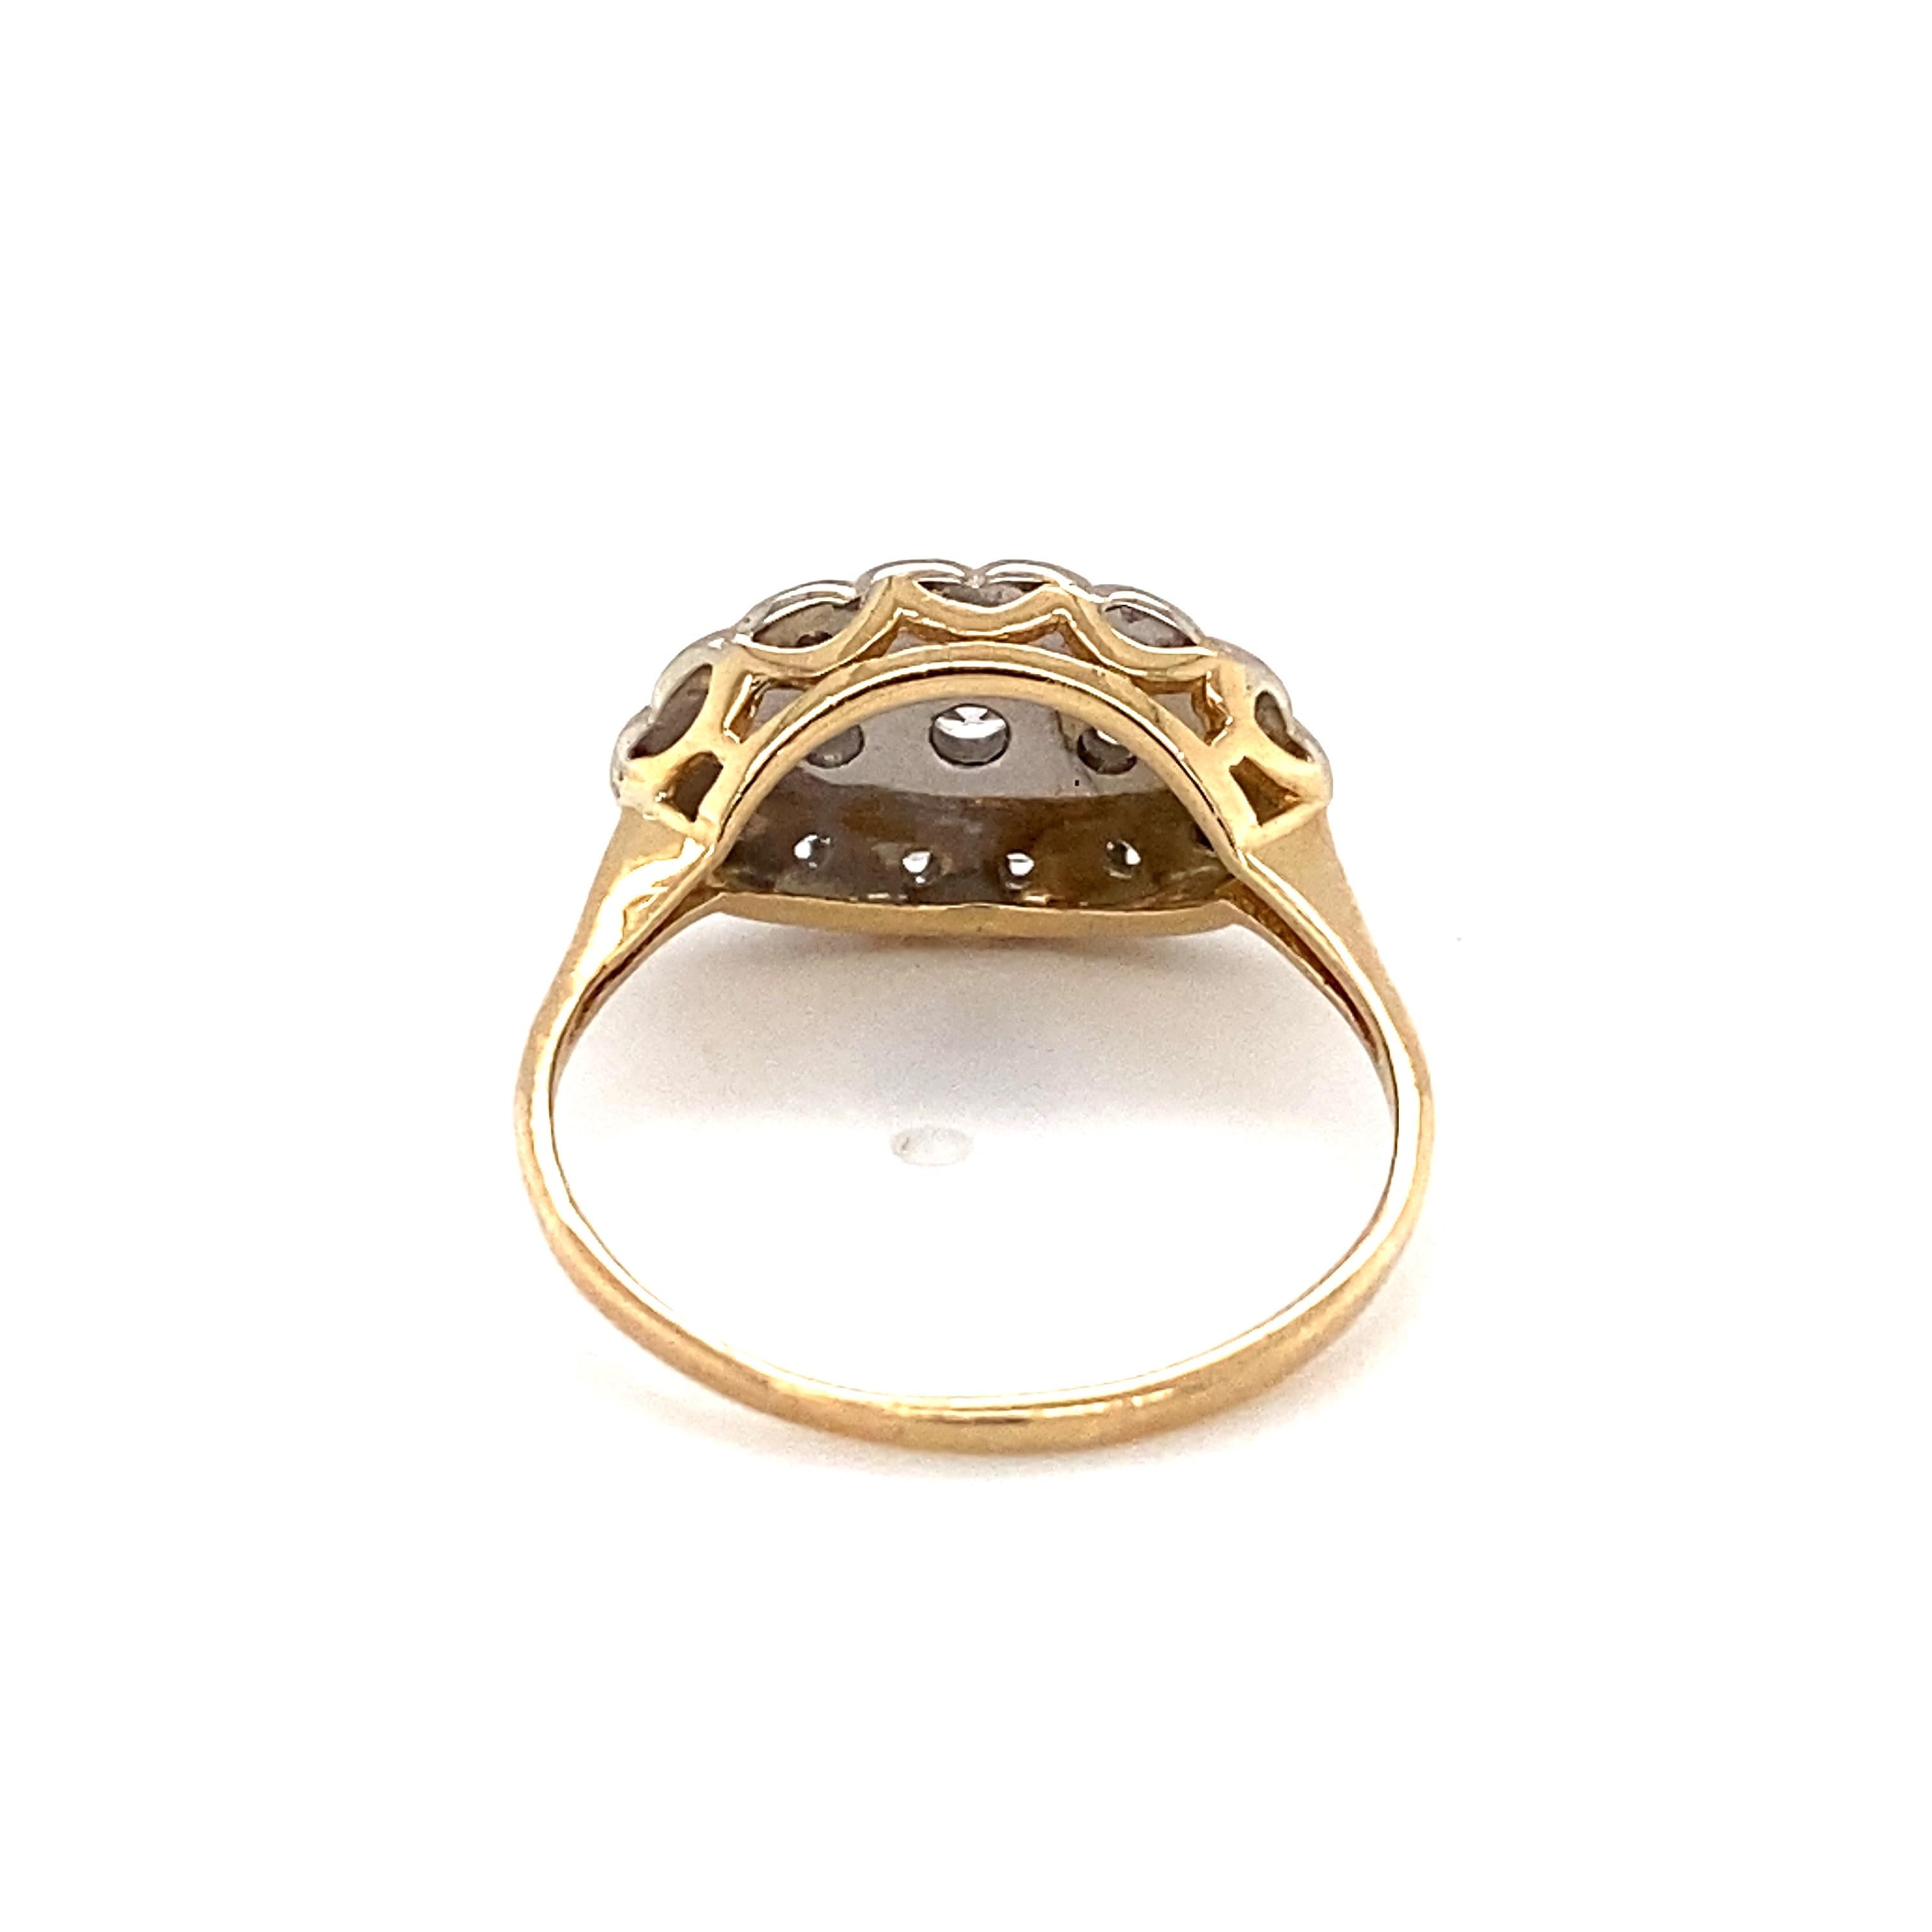 Single Cut 1930s Art Deco 0.25 Carat Diamond Ring in 14 Karat White and Yellow Gold For Sale